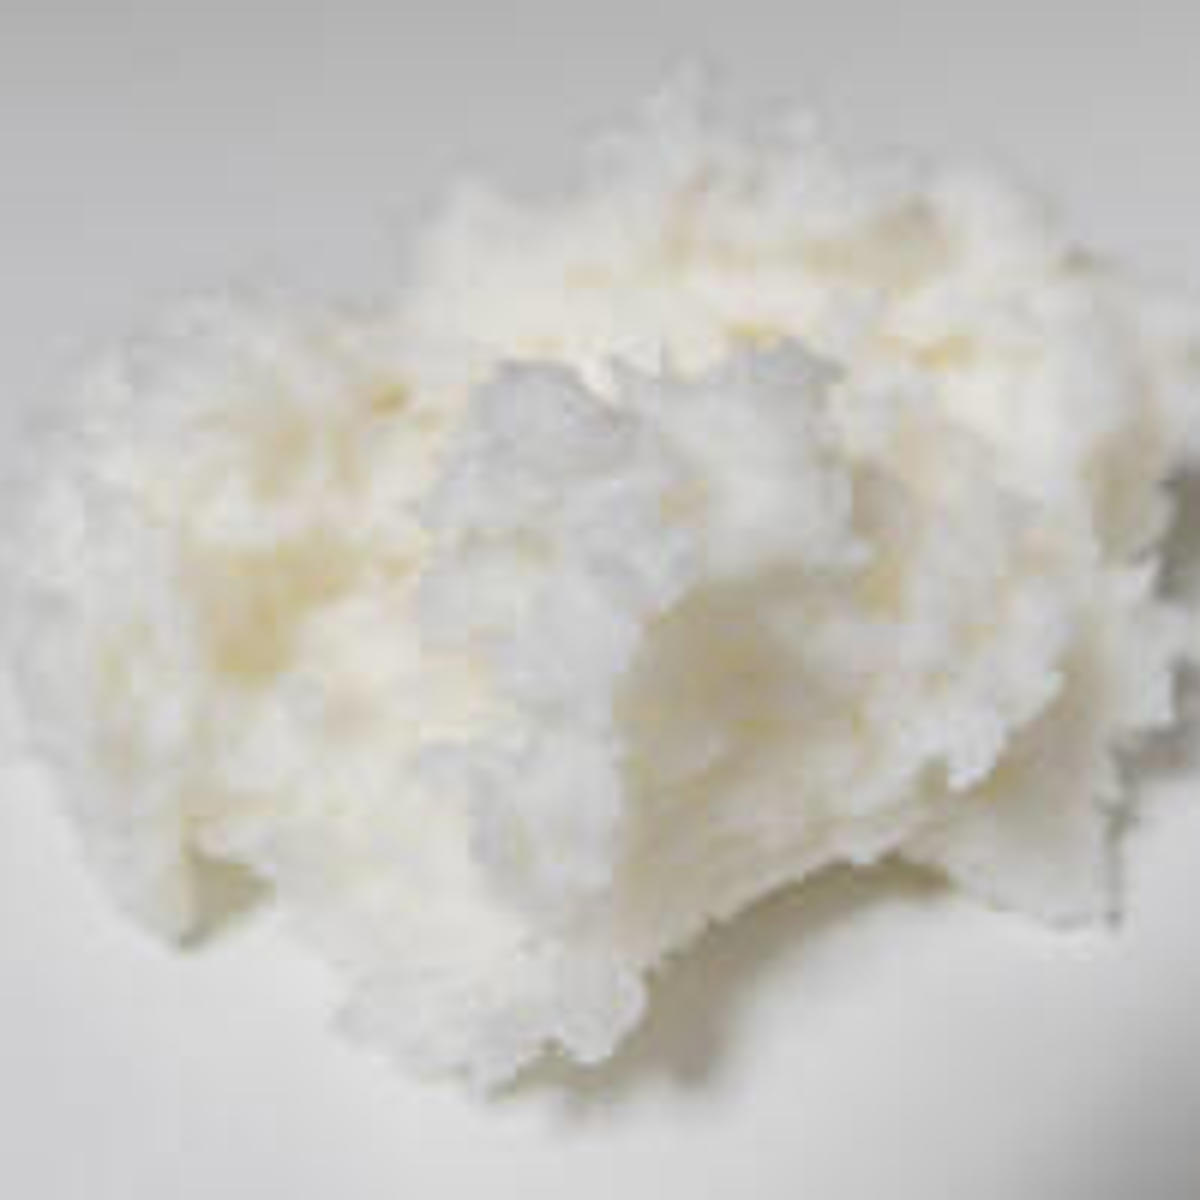 Bleached-chemi-thermomechanical pulp